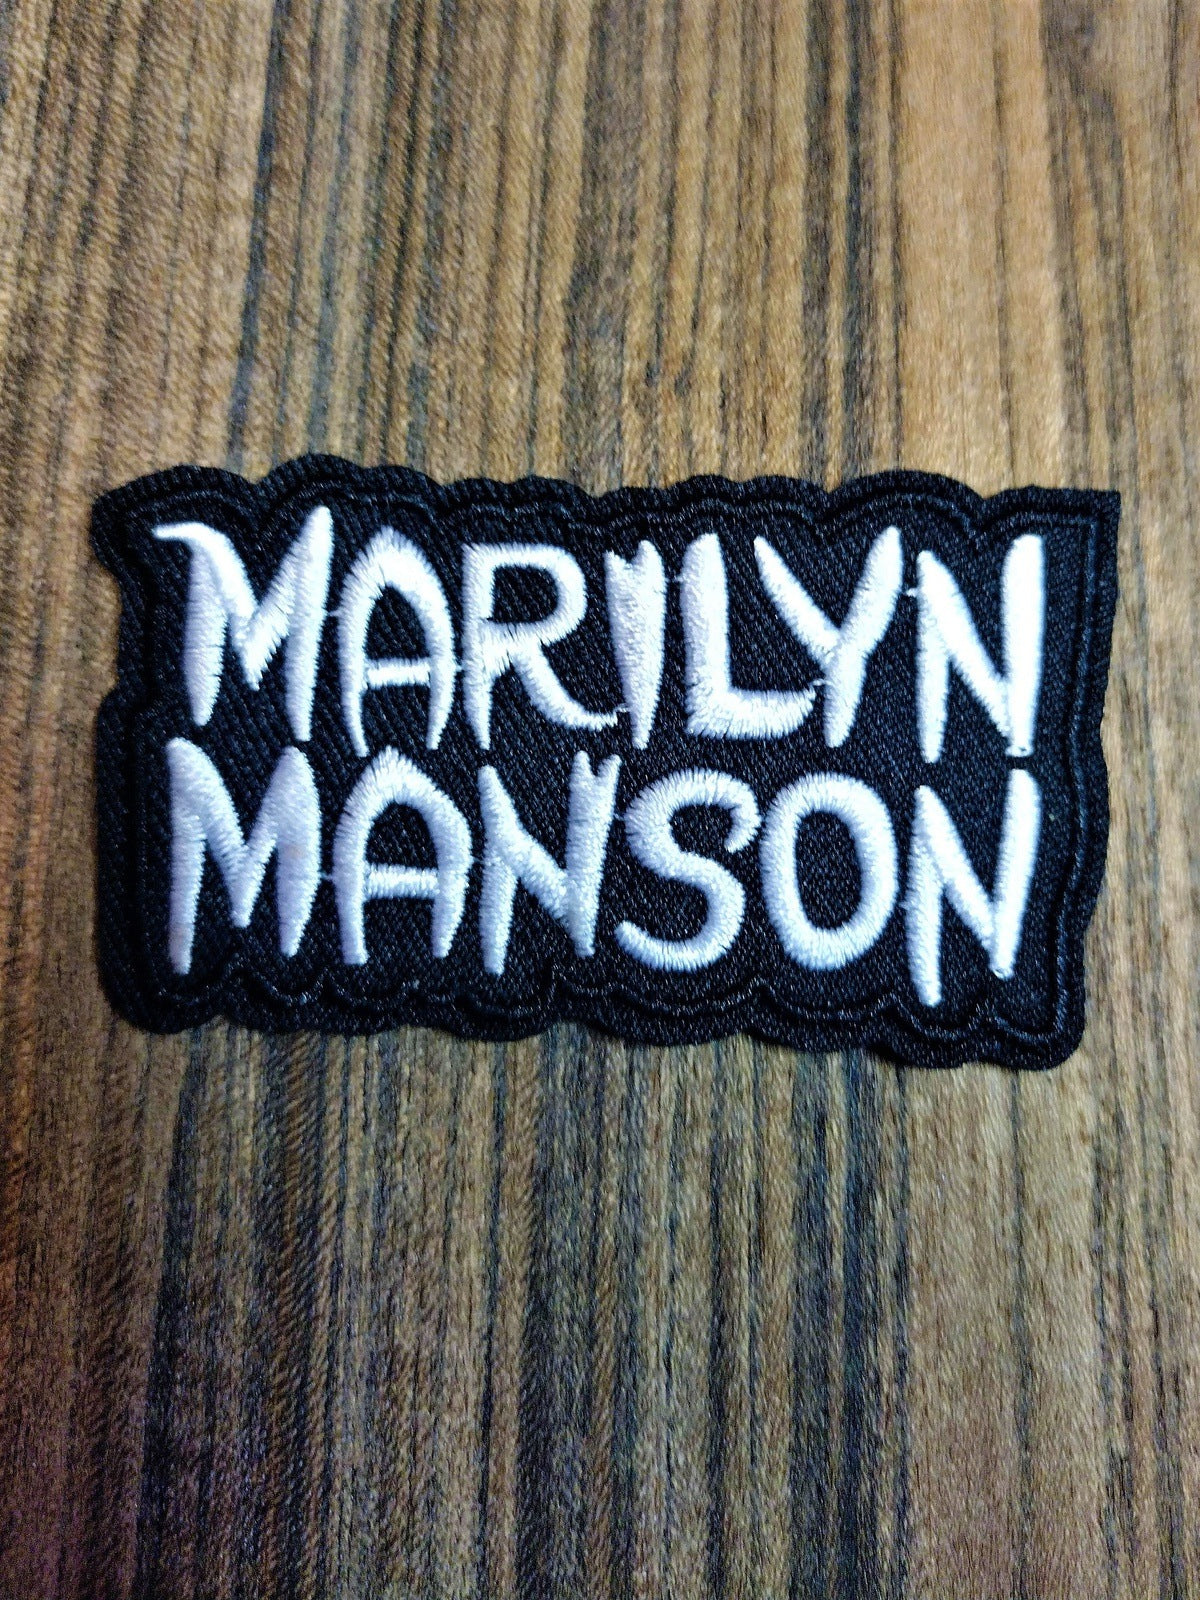 Marilyn Manson Patch approx. 3 inches